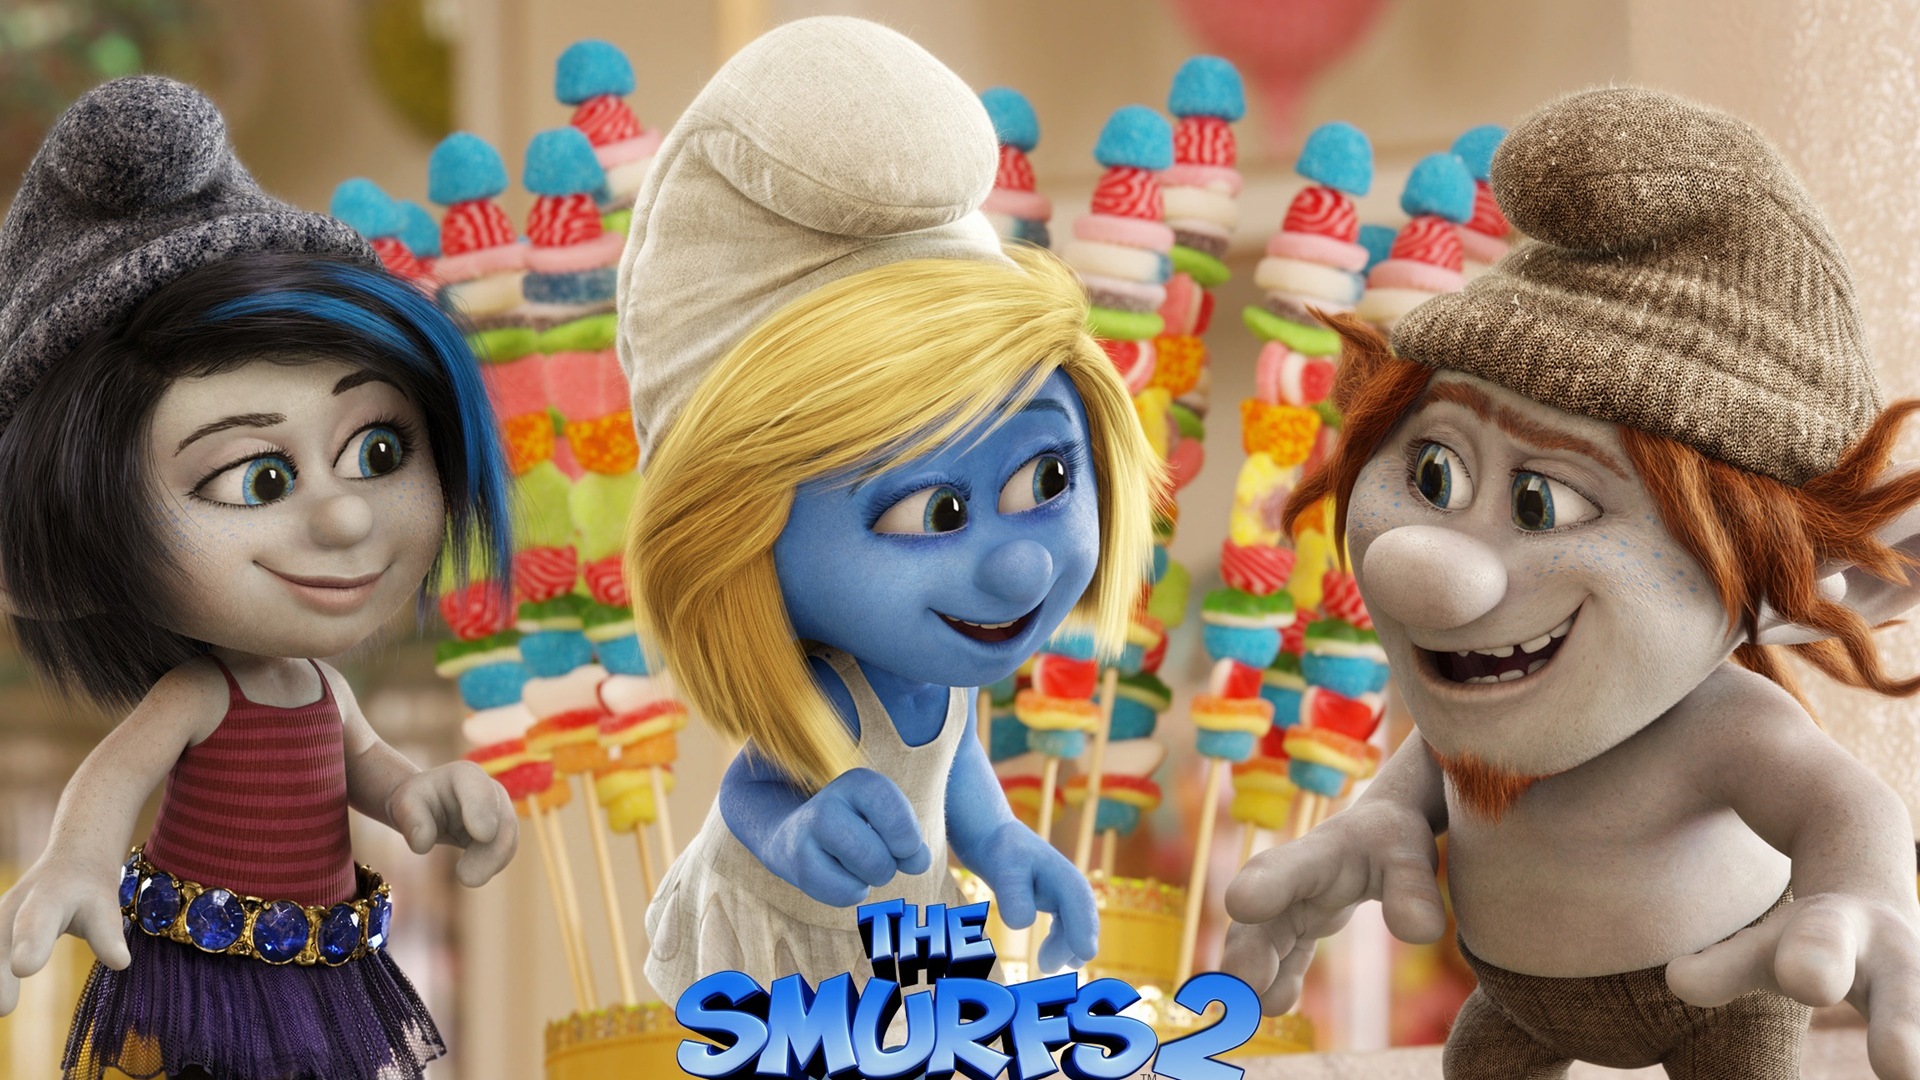 The Smurfs 2 HD movie wallpapers #5 - 1920x1080